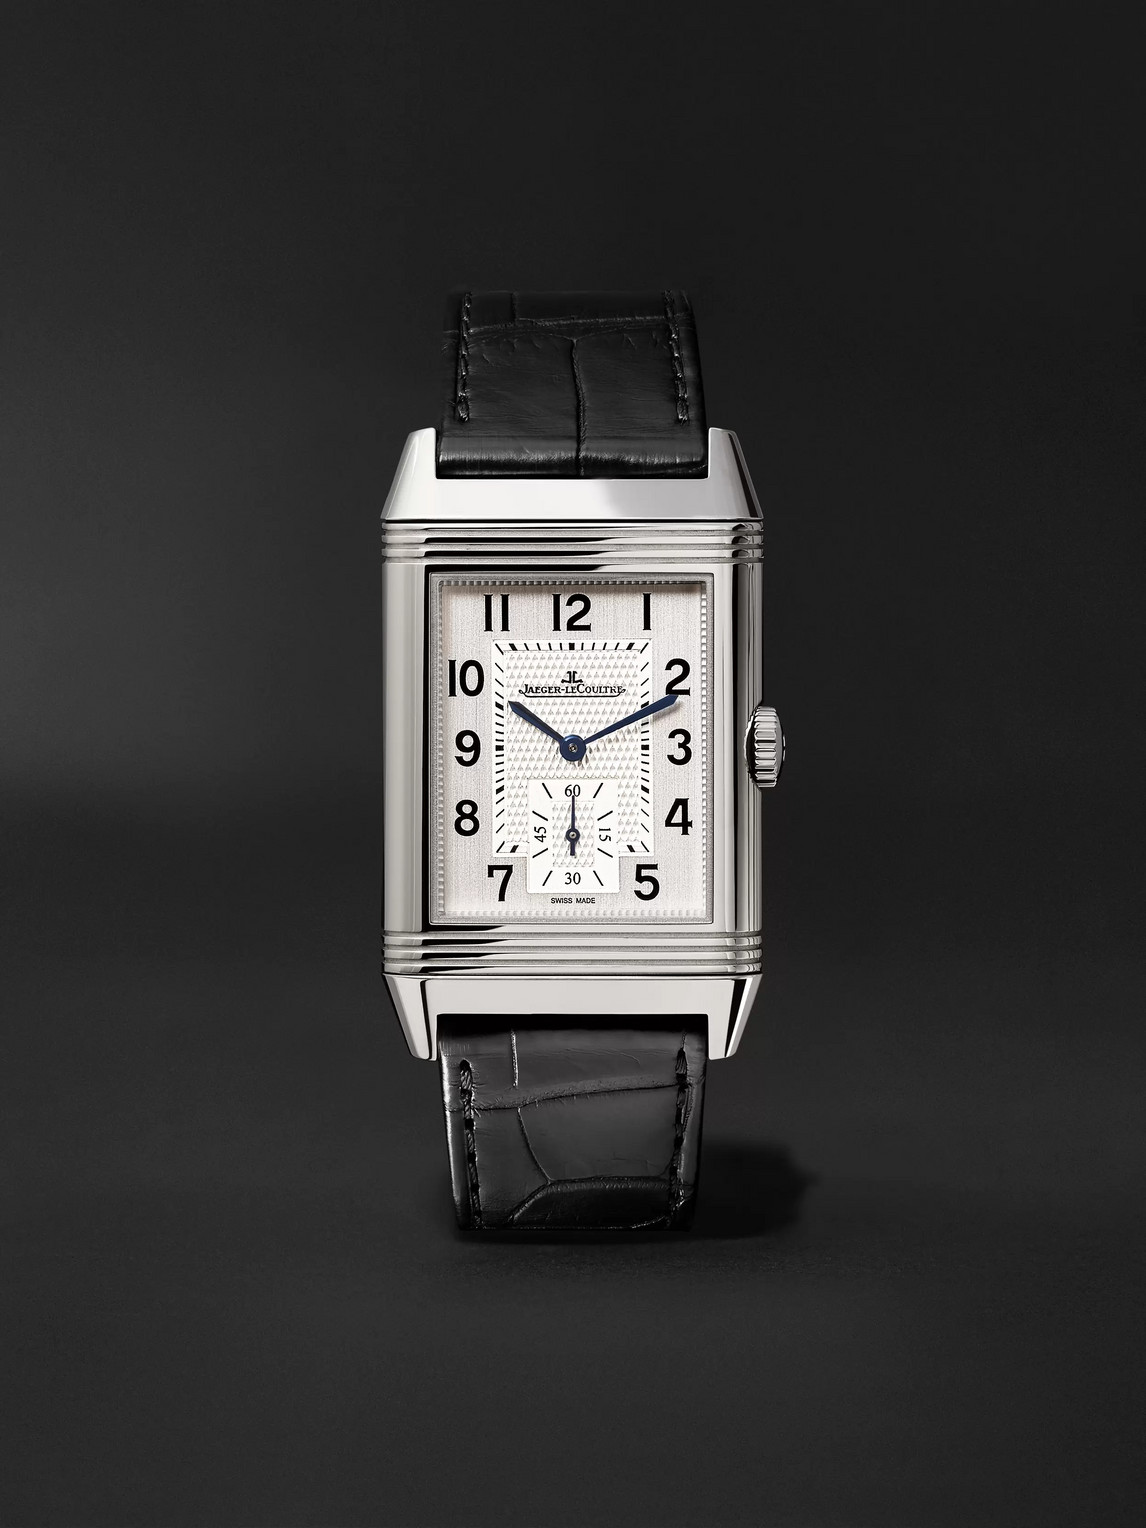 Jaeger-lecoultre Reverso Classic Large Duoface Hand-wound 47mm X 28mm Stainless Steel And Leather Watch, Ref. No. Jlq In Silver